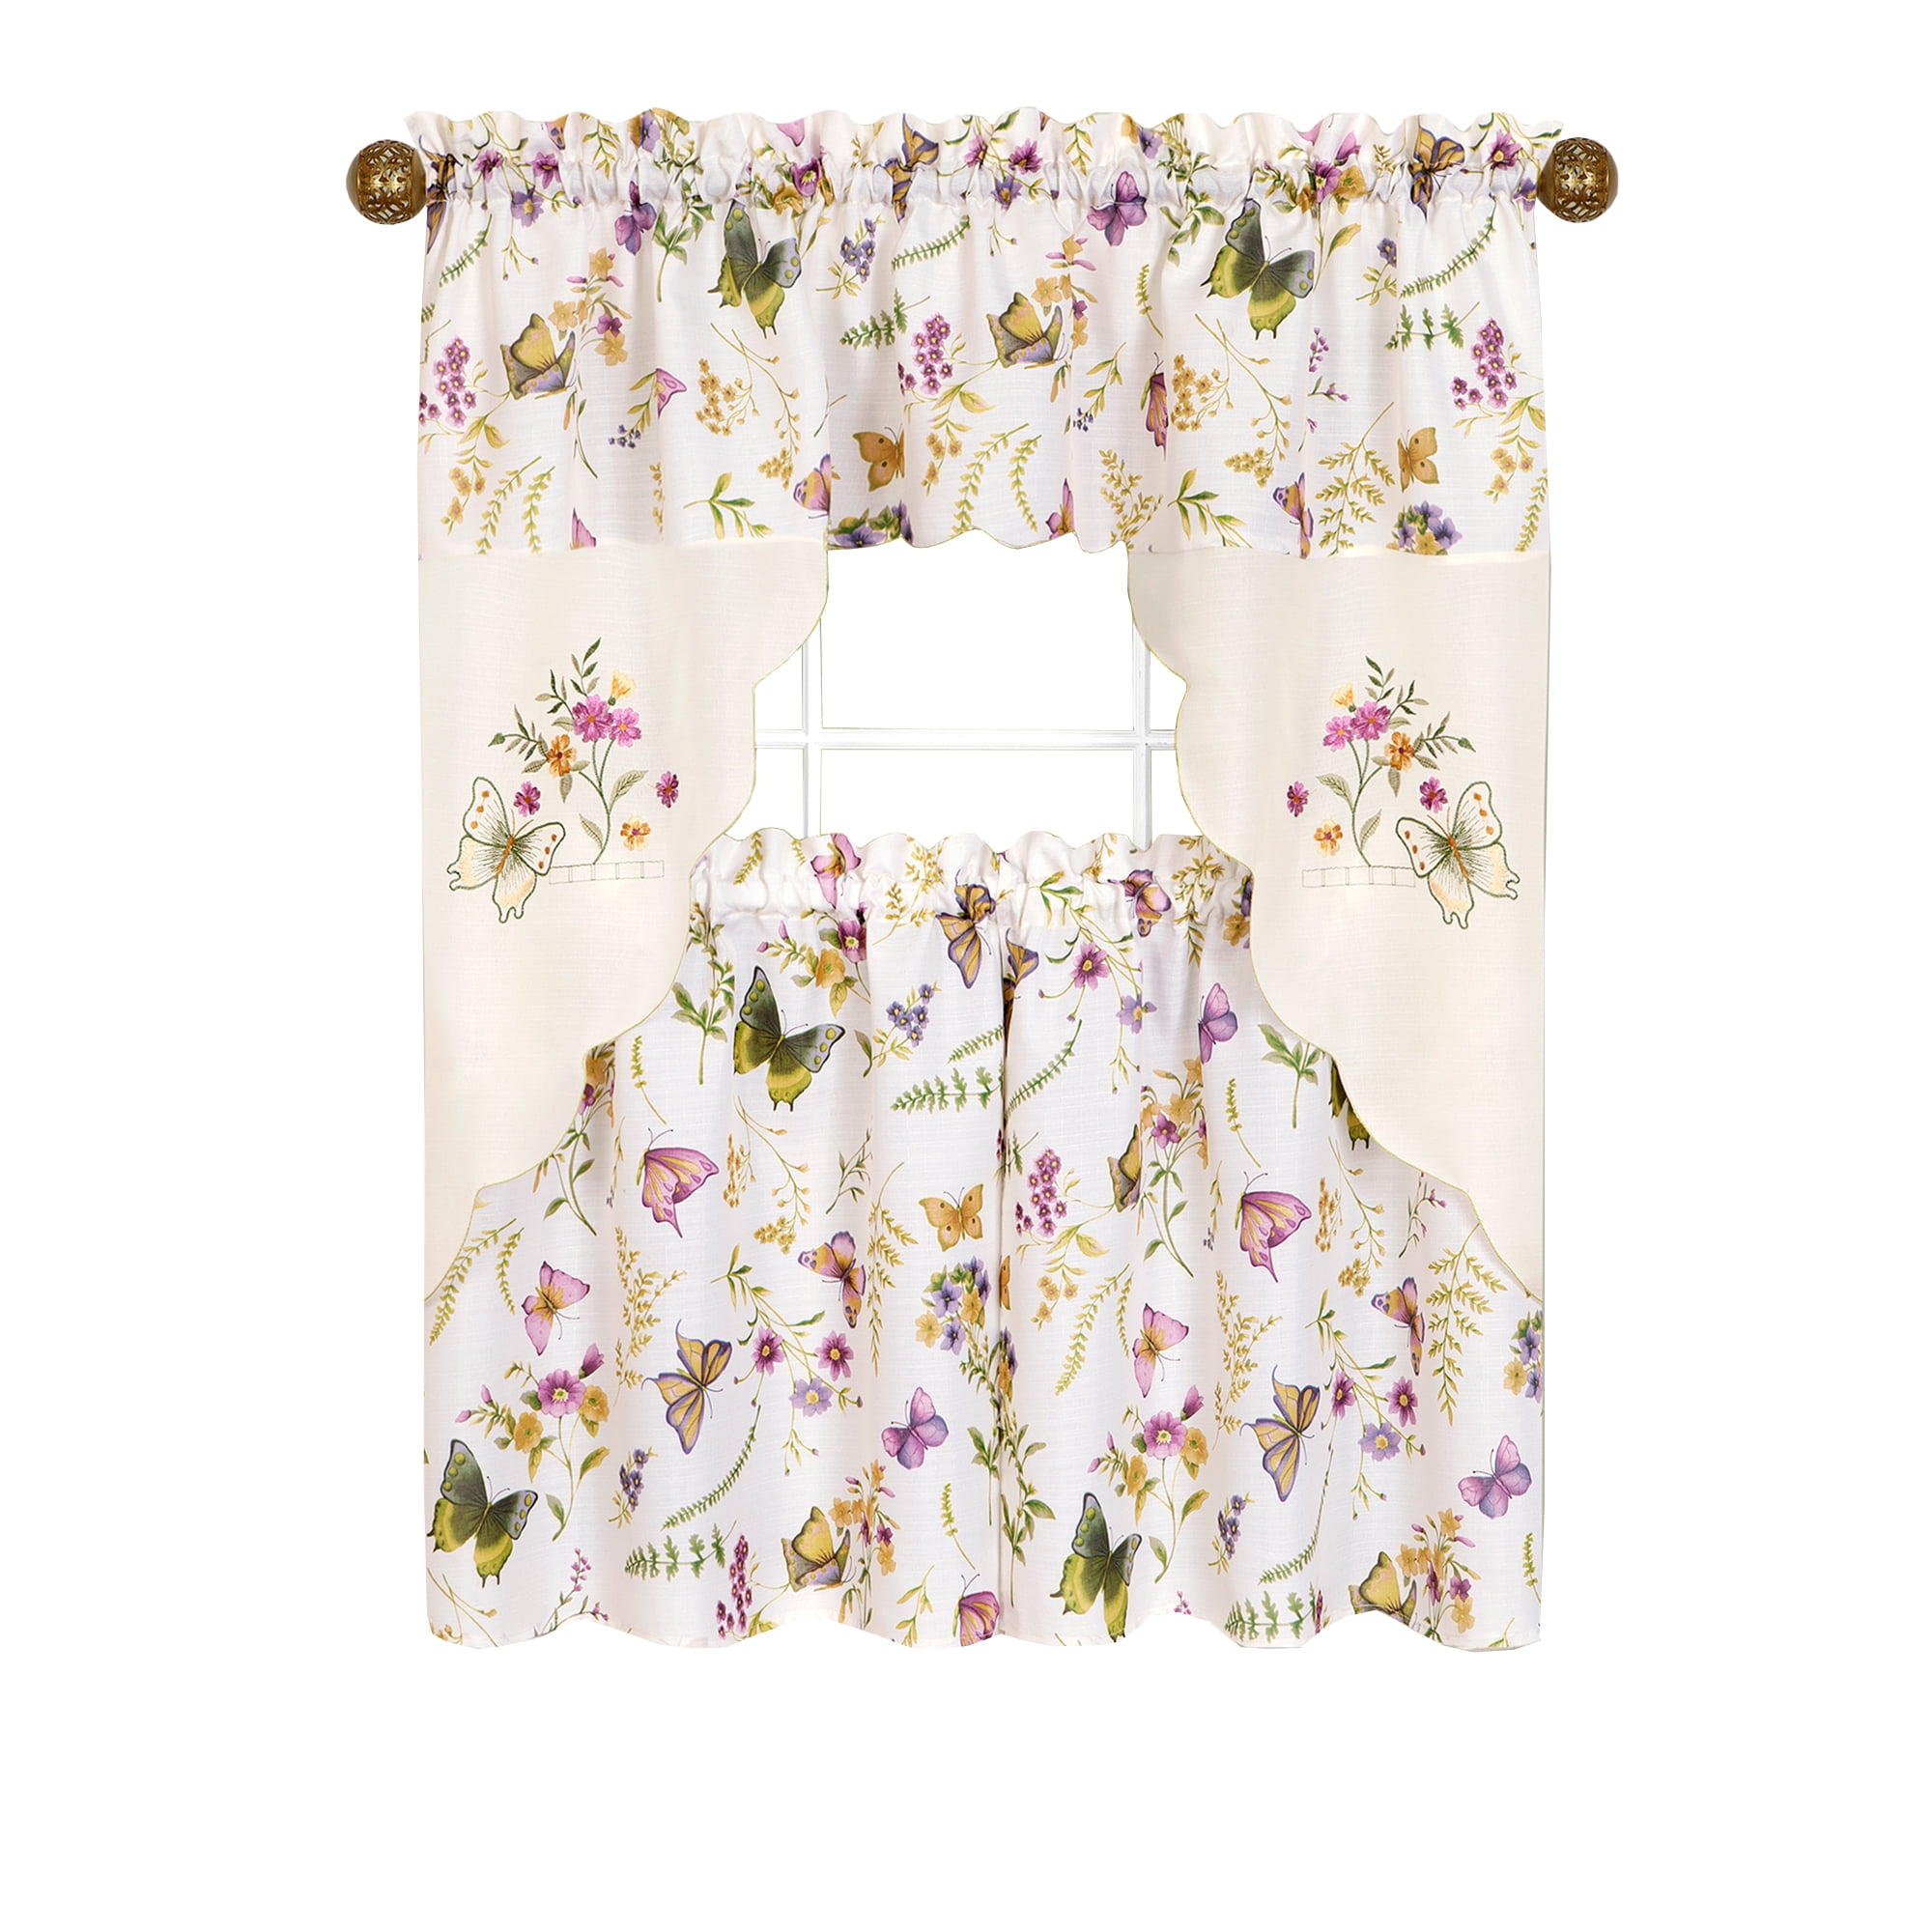 3 pc Kitchen Curtains Set BUTTERFLIES & FLOWERS 2 Tiers:29"x36" & Swag 58"x36" 